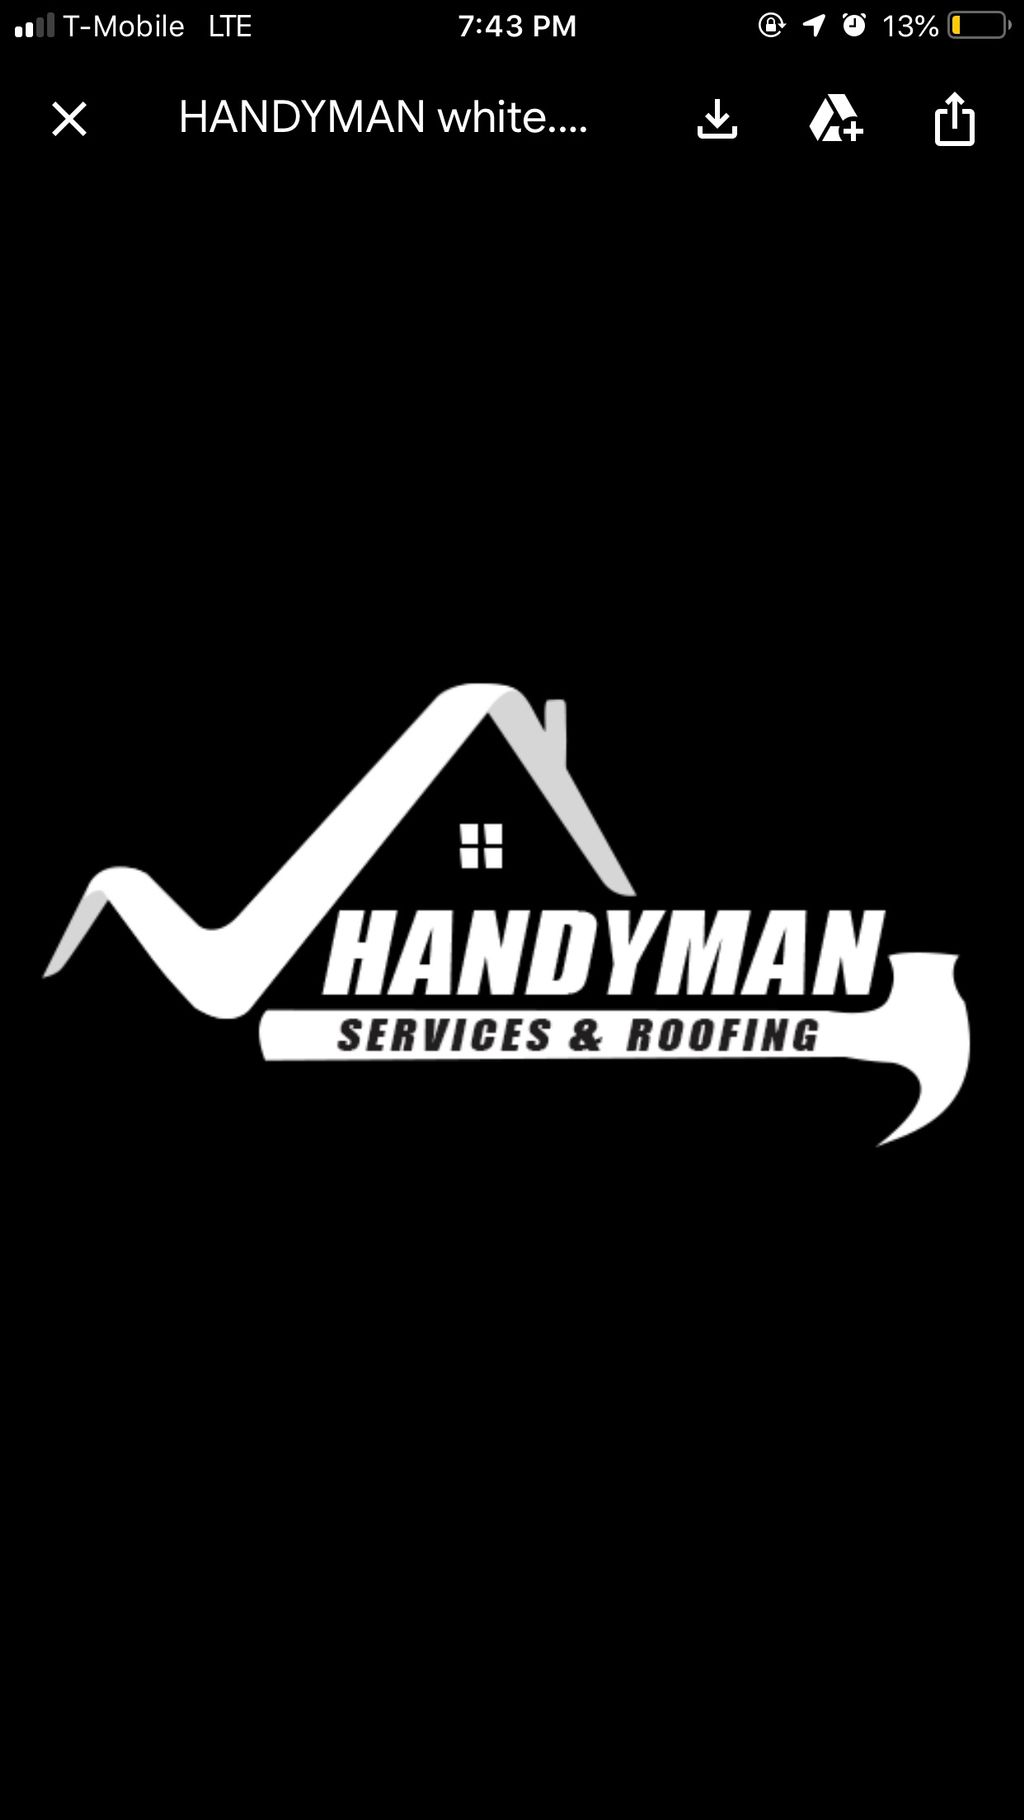 Handyman Services and Roofing